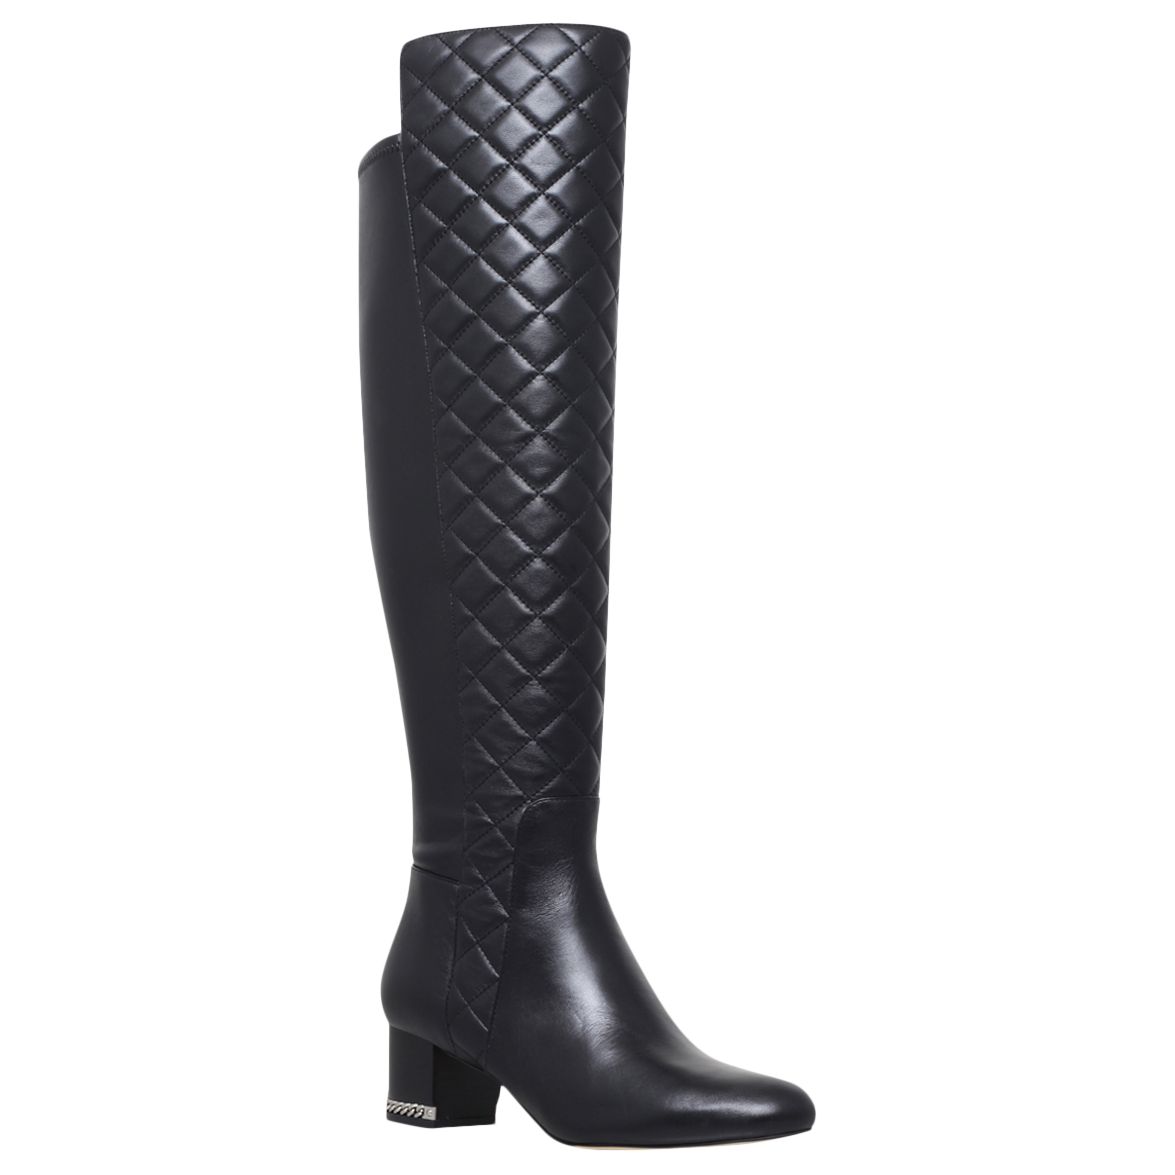 quilted michael kors boots